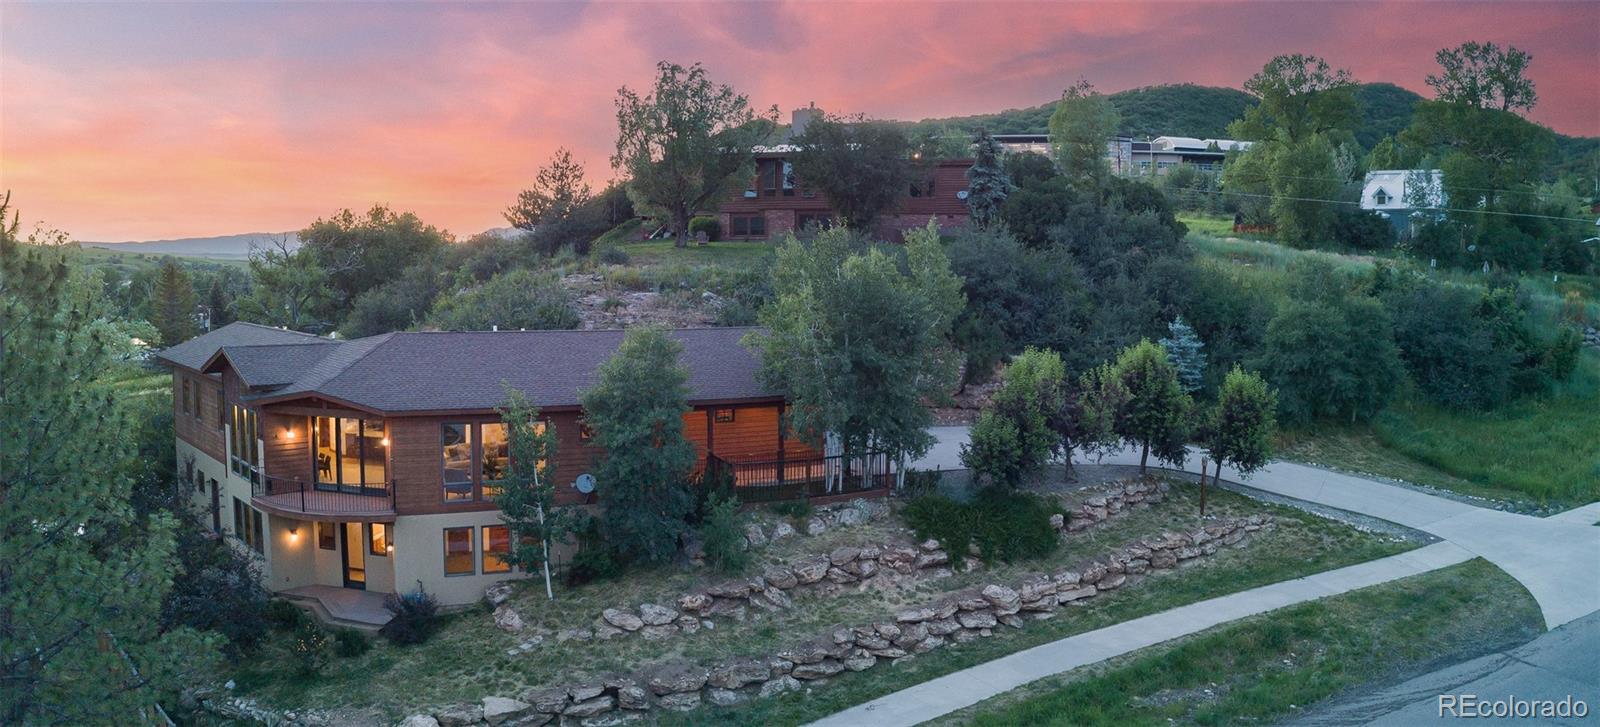 215 12th, Steamboat Springs, CO